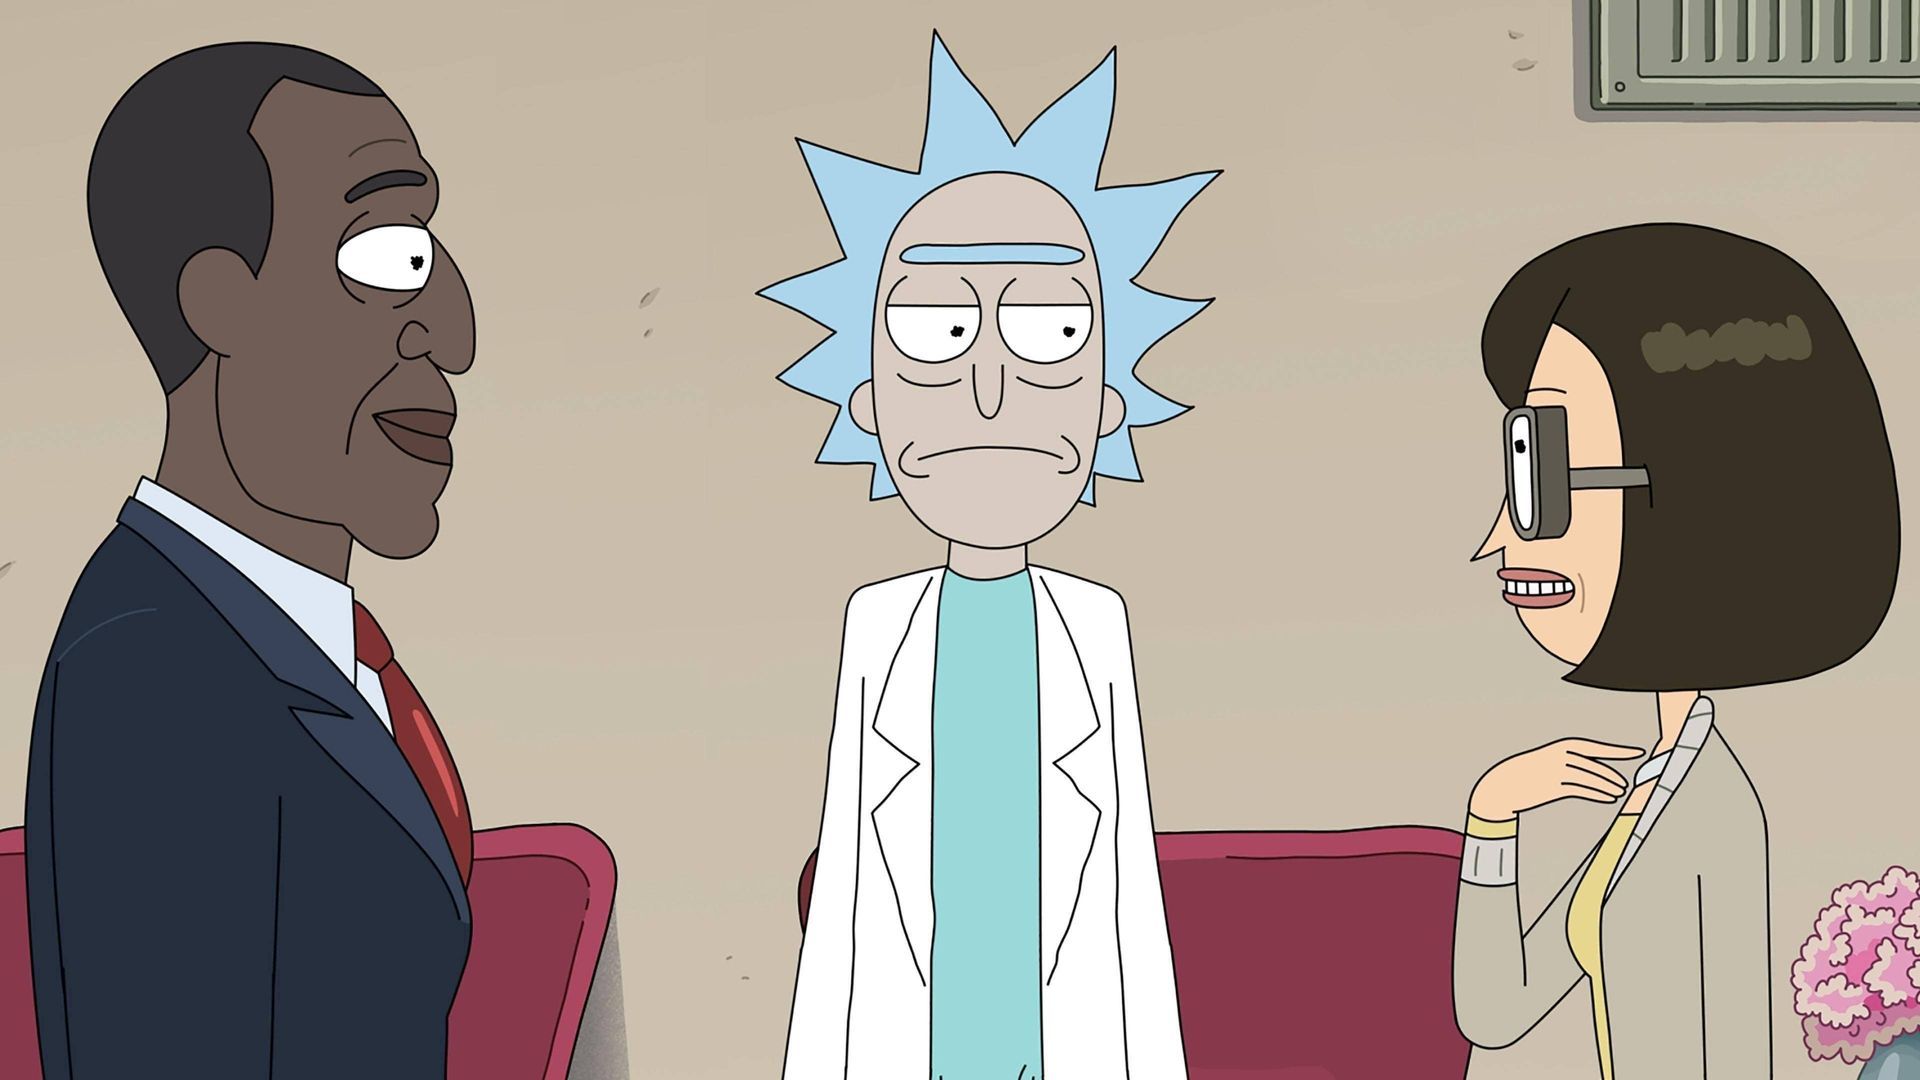 How to Watch 'Rick and Morty' Season 7 Online for Free